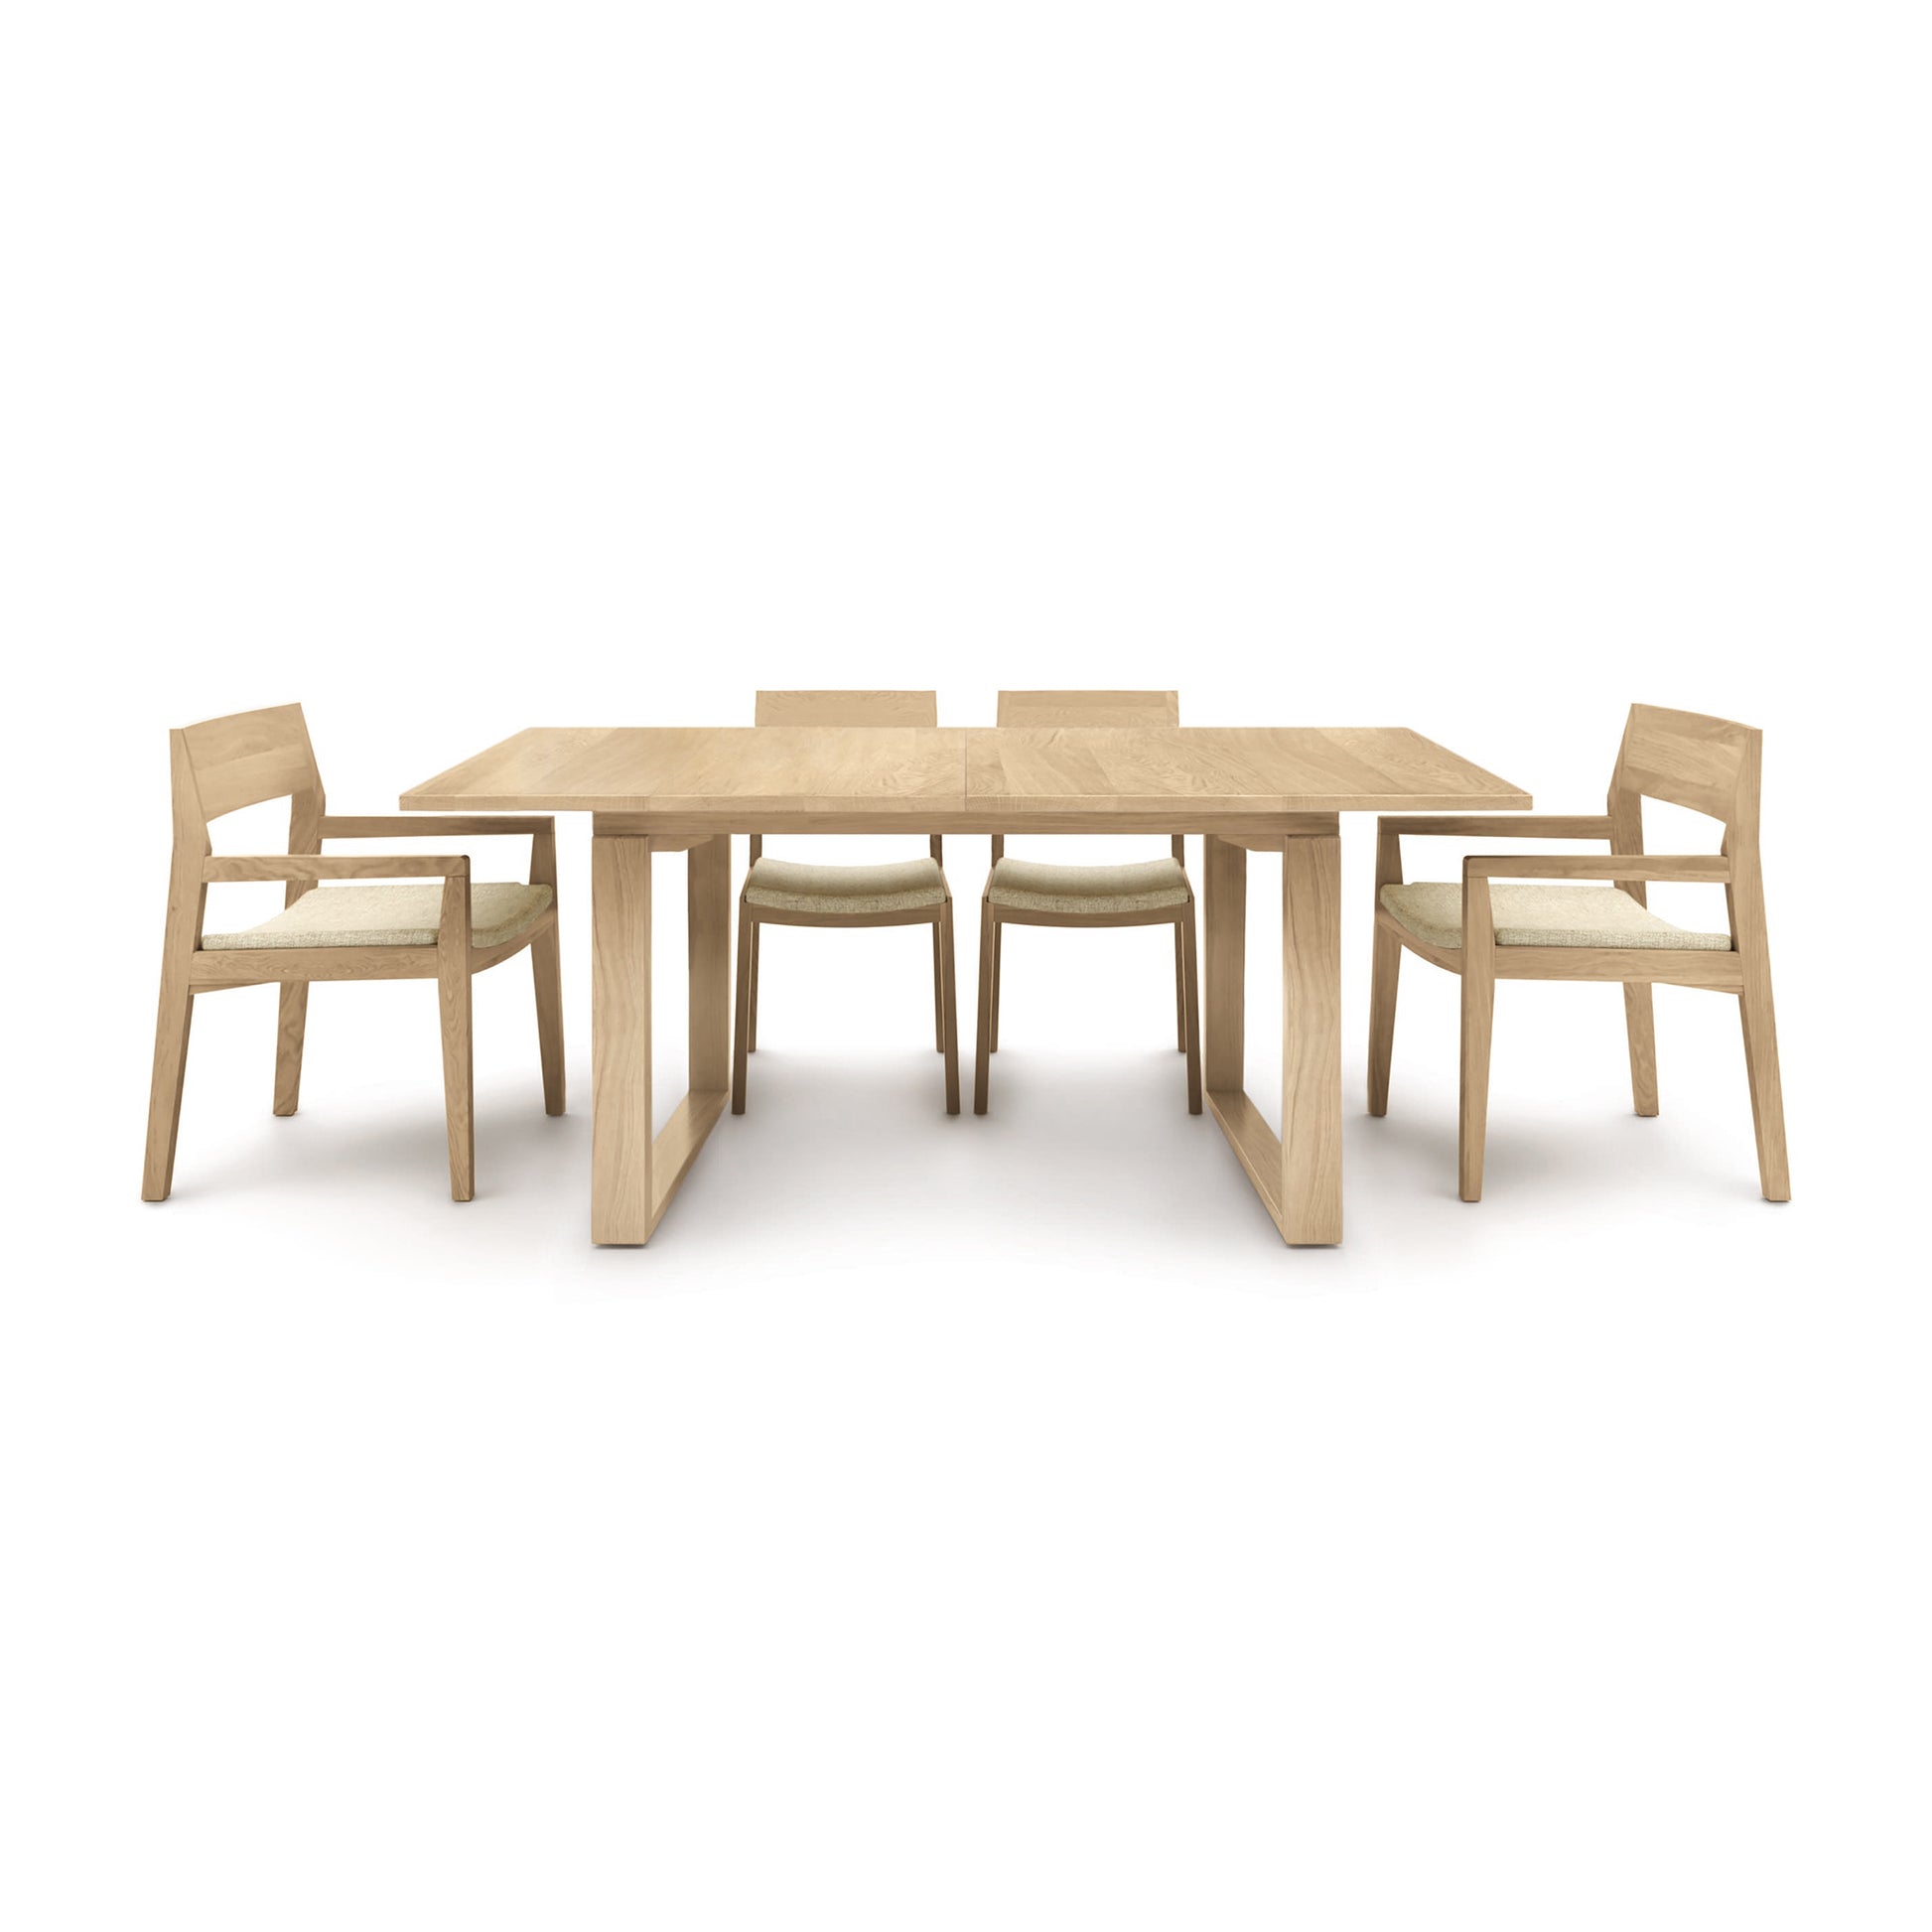 A Copeland Furniture Iso Extension Dining Table with four chairs on a white background.